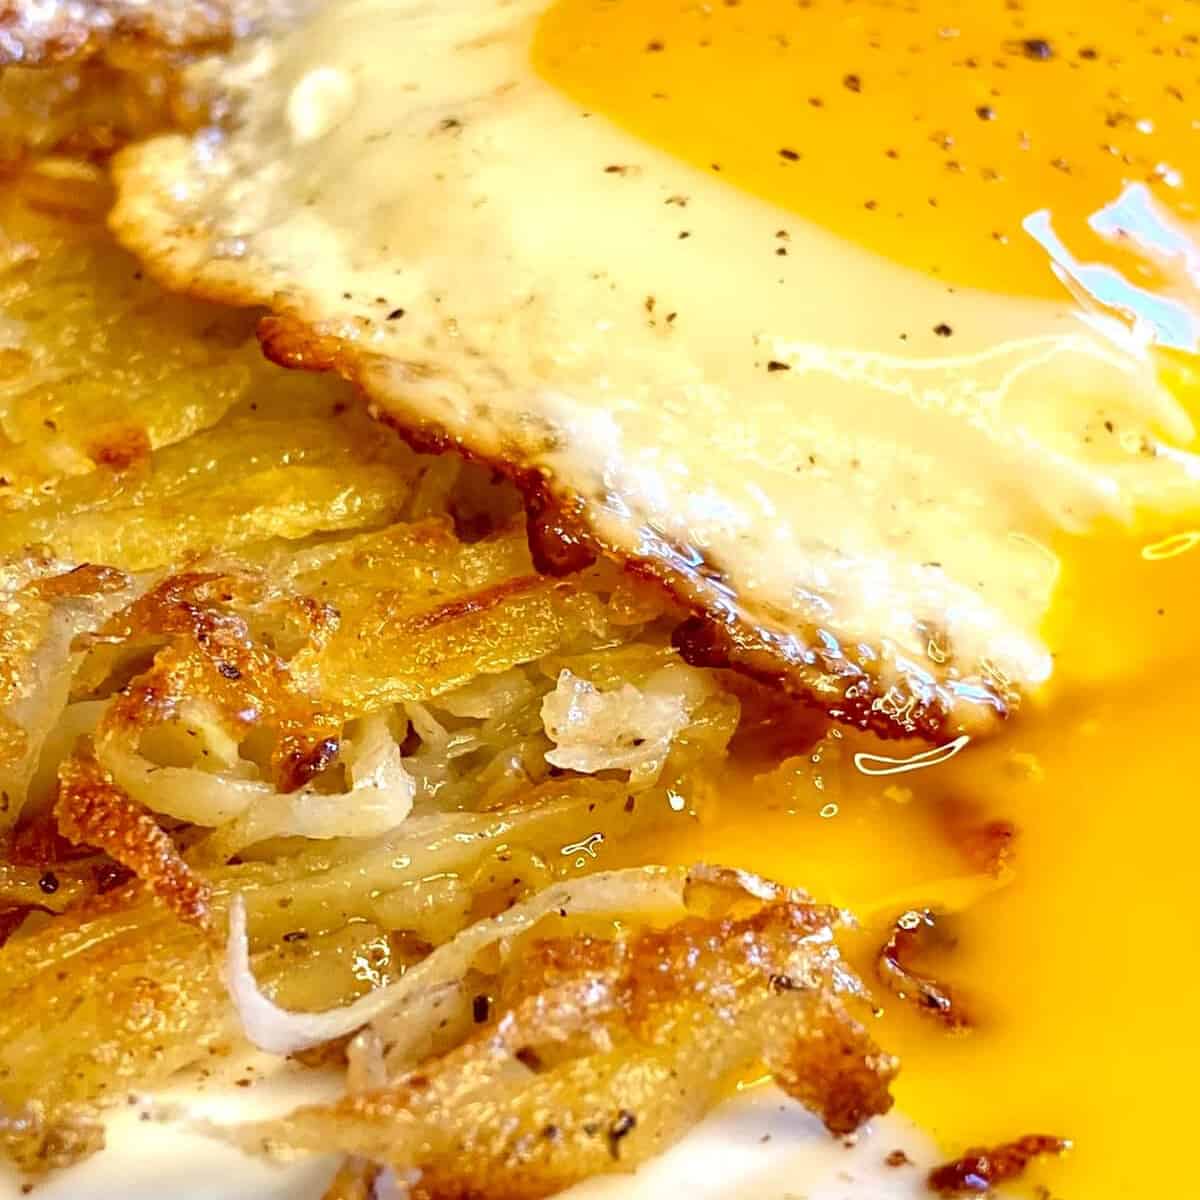 How to make hash browns